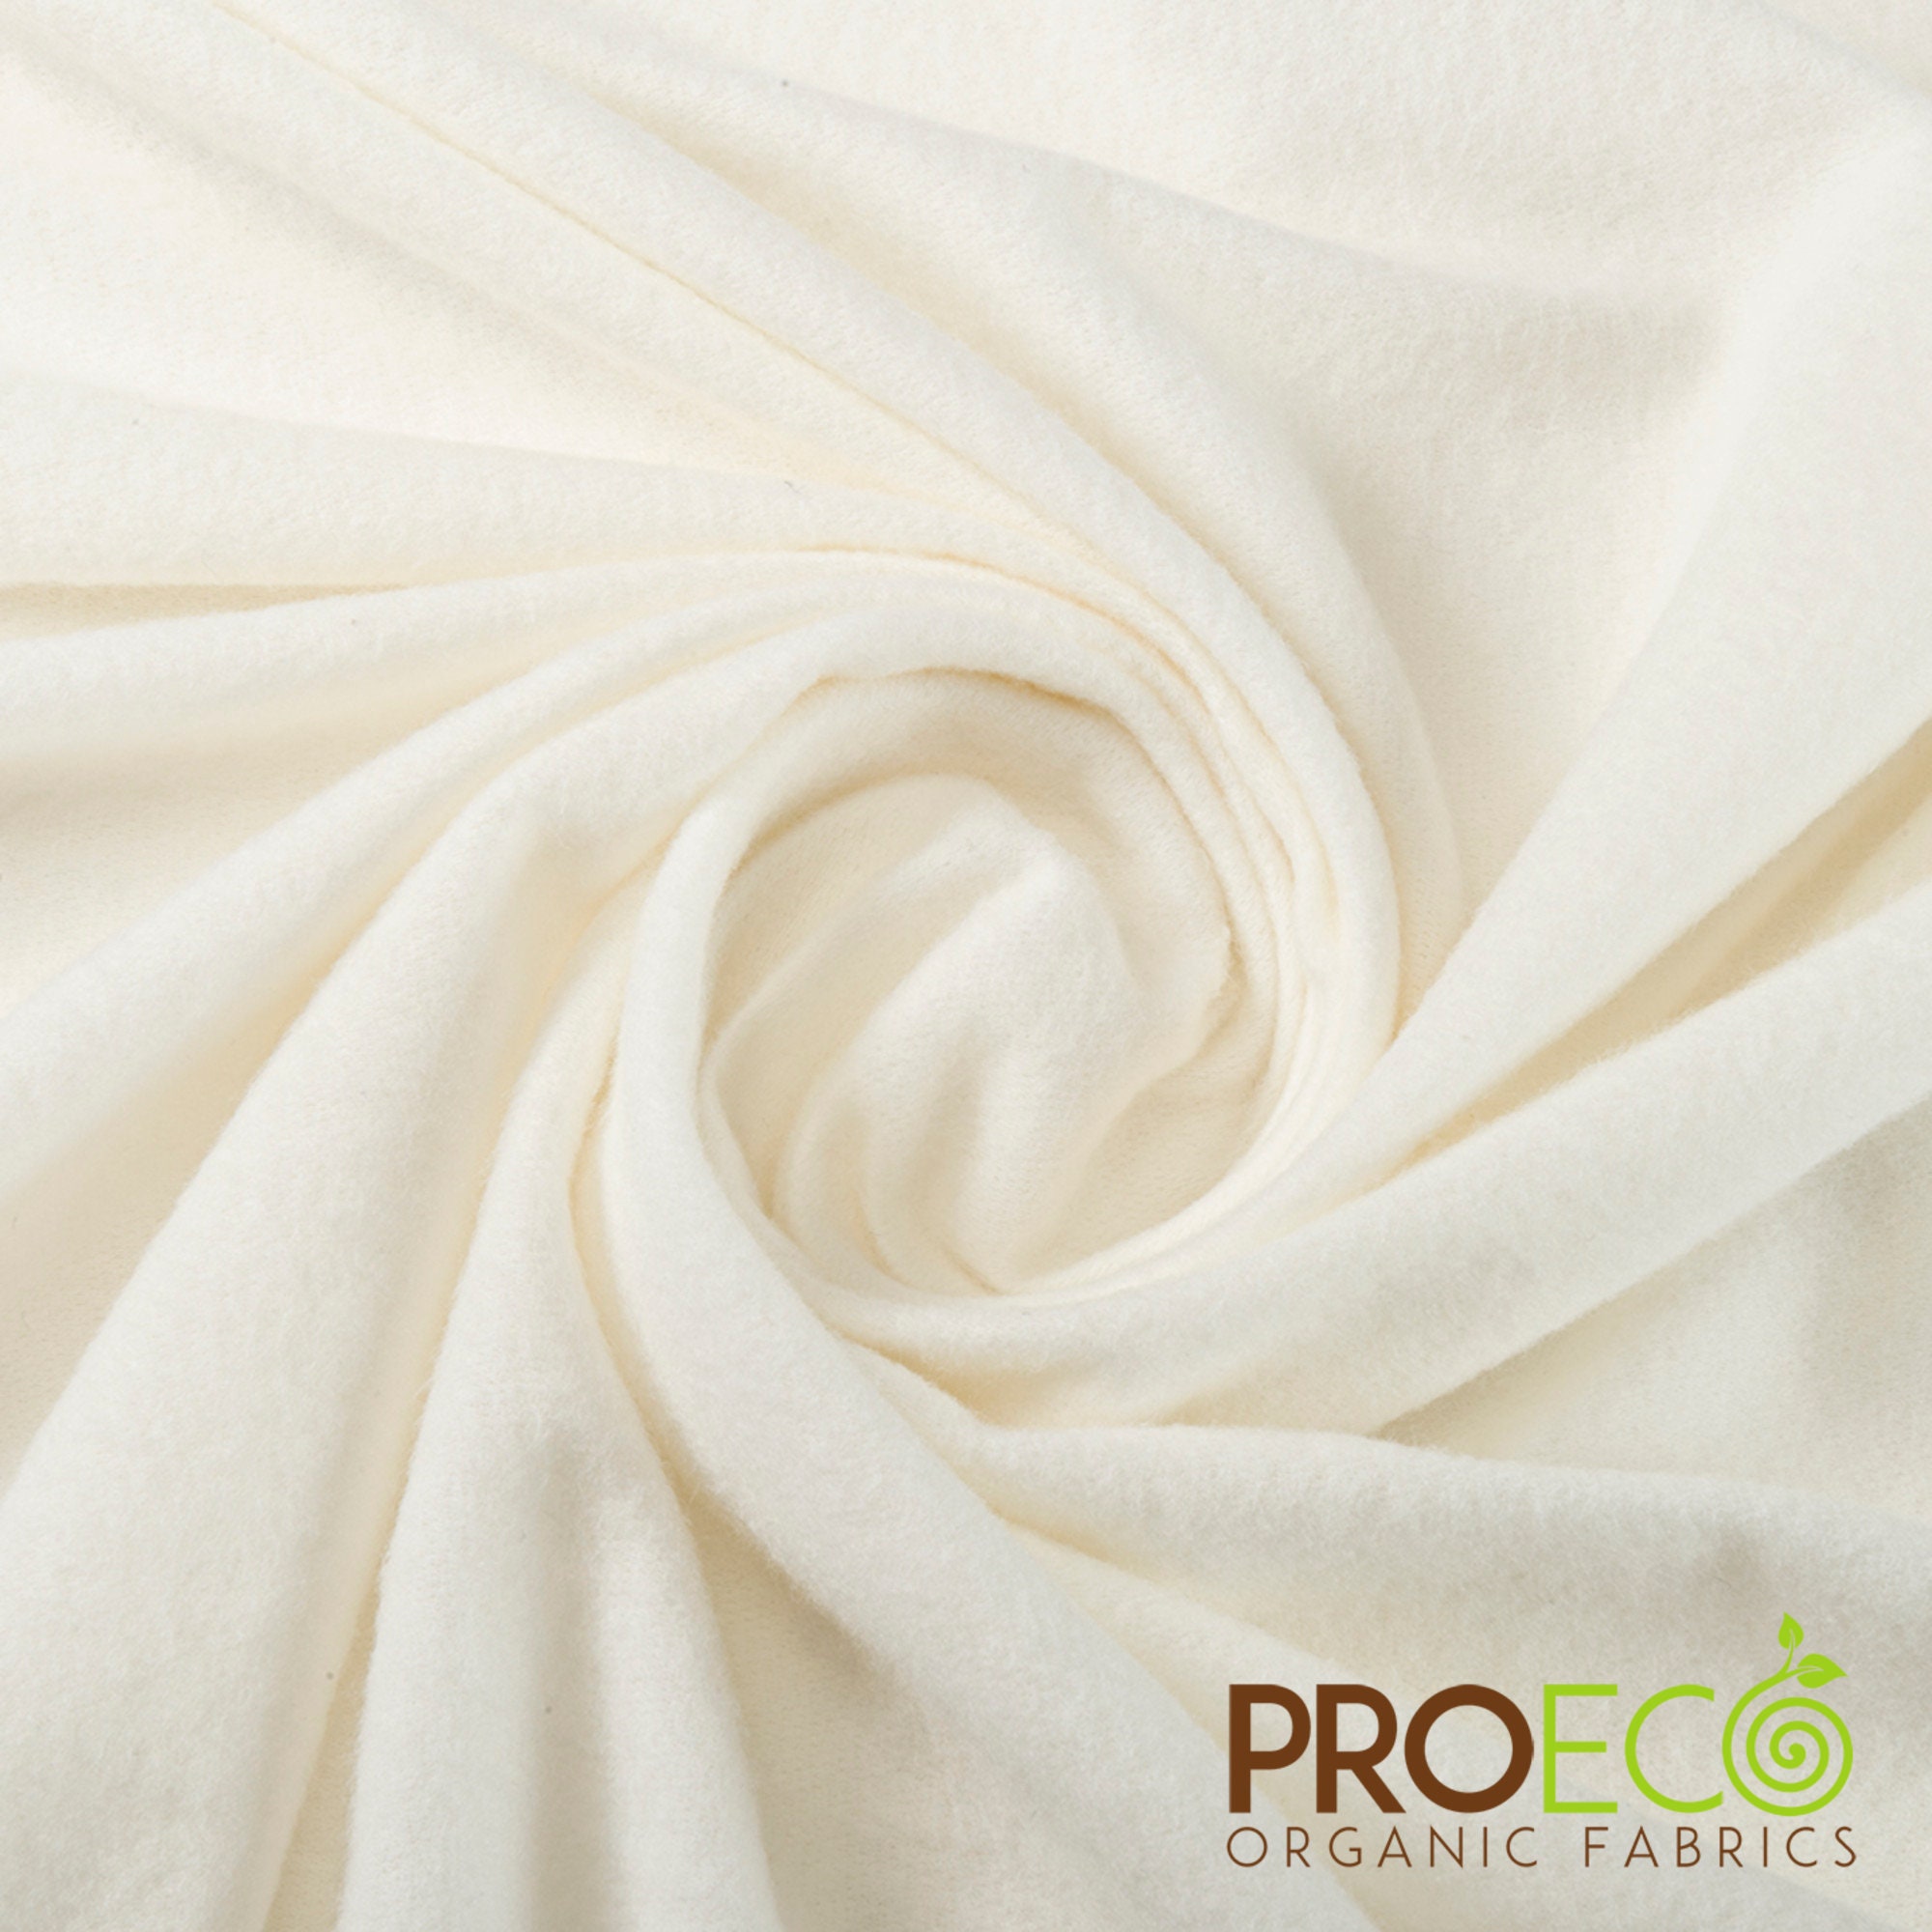 Proeco® Bamboo Lining Fleece Fabric W-255 W-286 natural, Sold by the Yard 